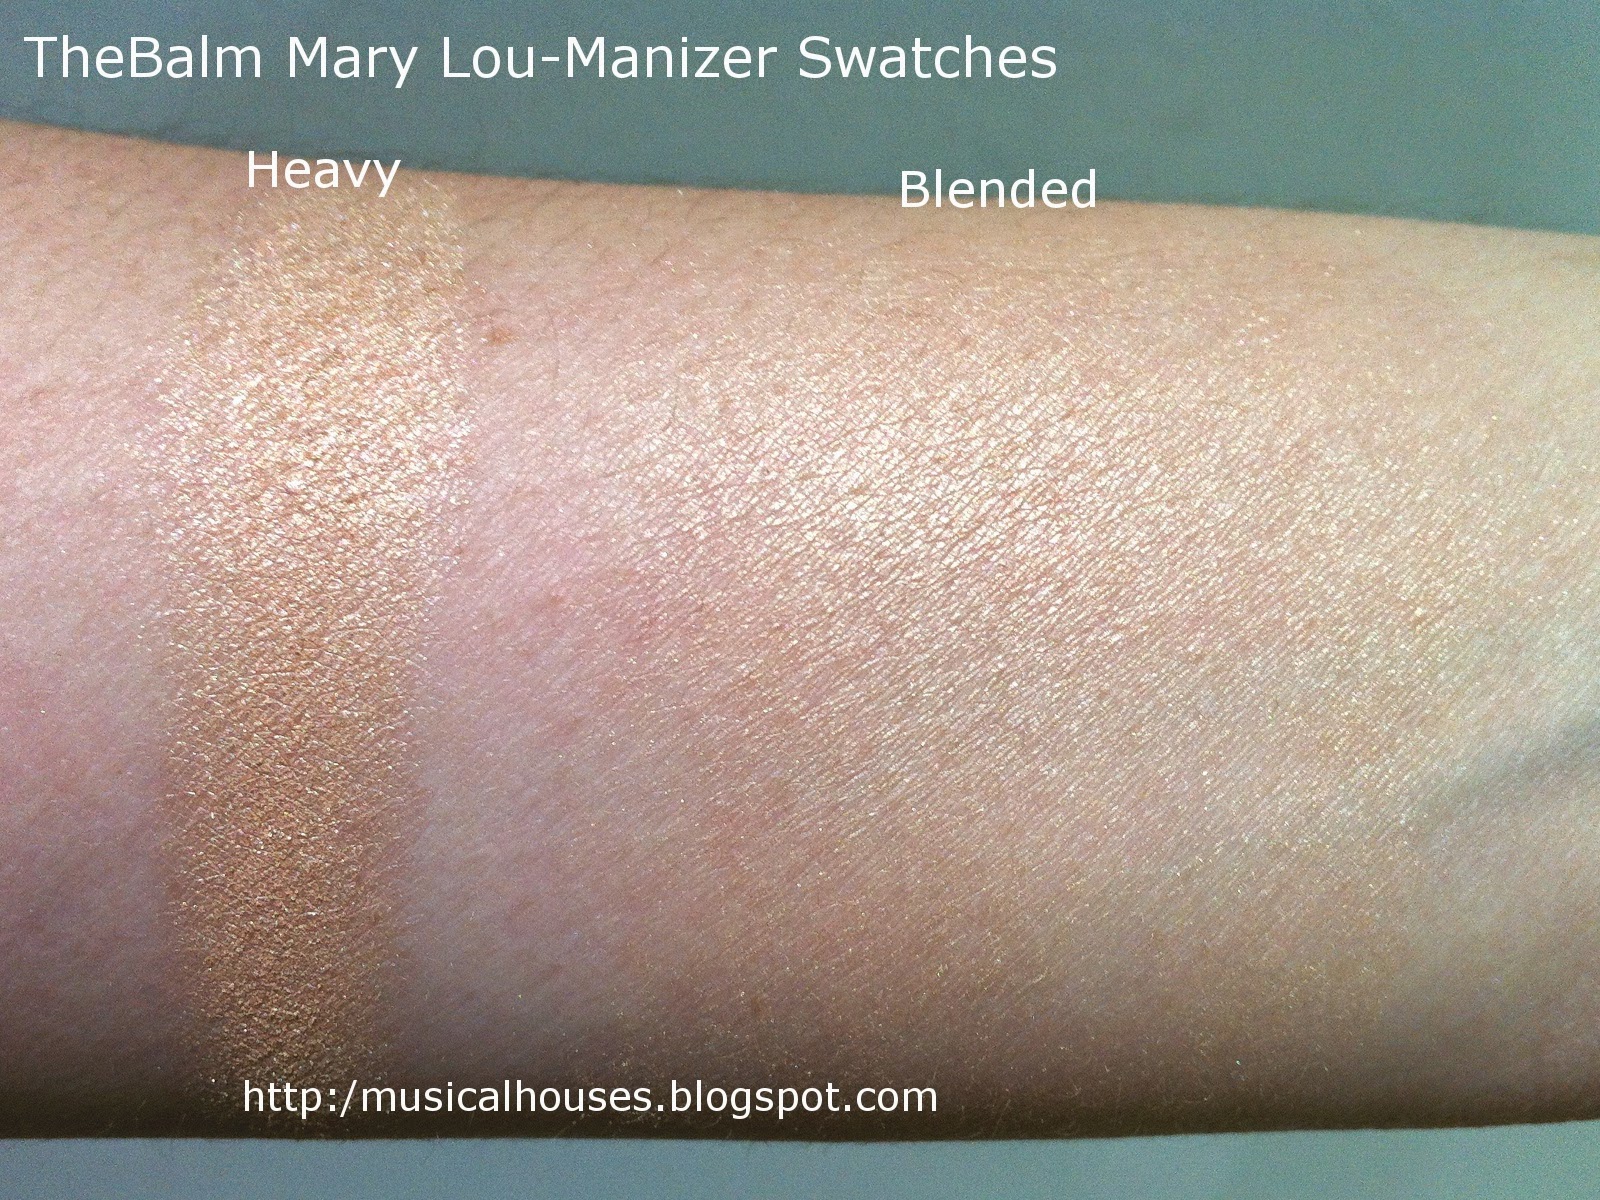 TheBalm Mary Lou-Manizer Swatches: Swatch - of